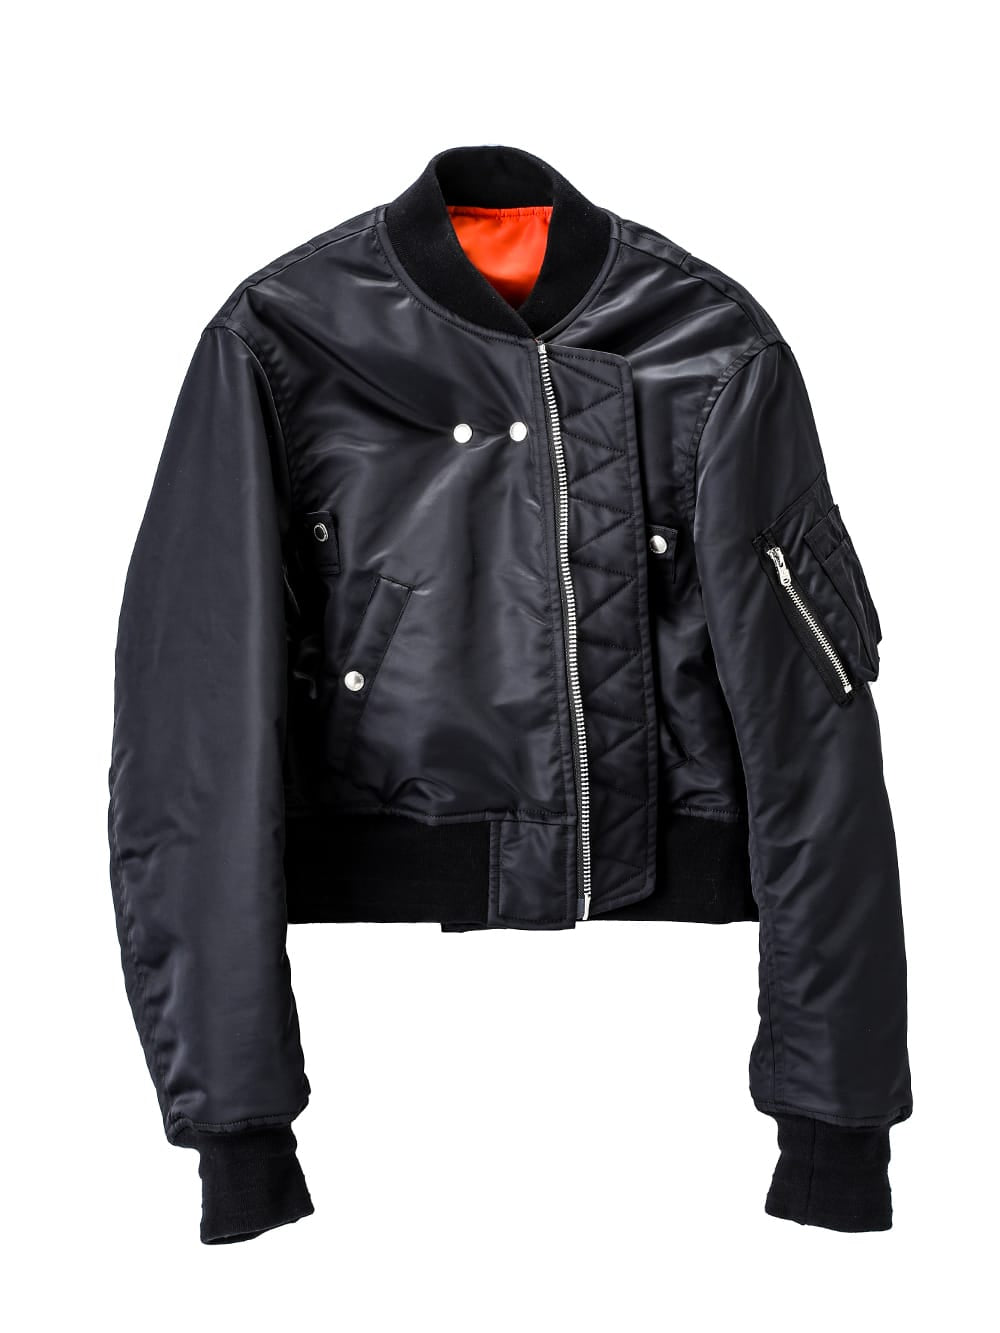 two-way cropped bomber jacket.